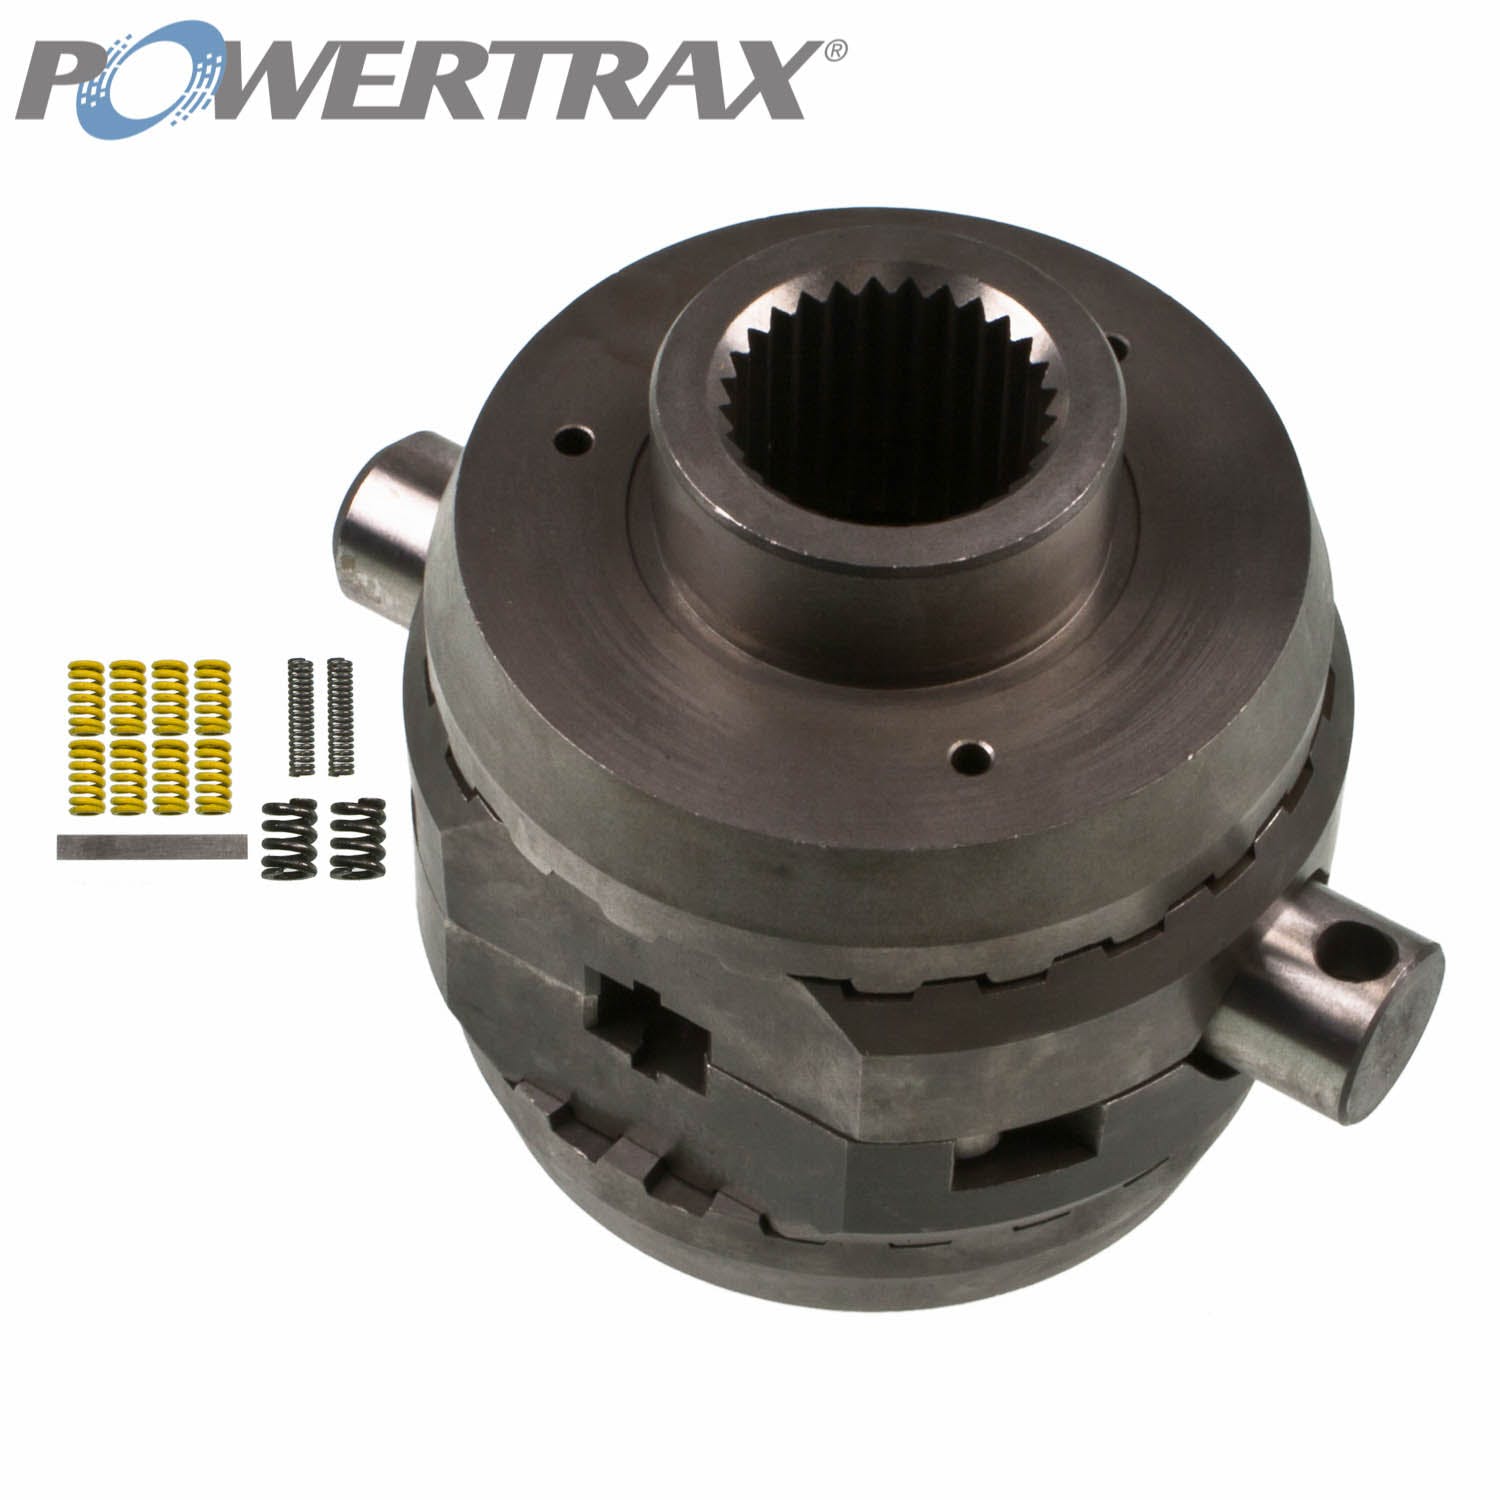 PowerTrax 9207852805 No-Slip Traction System